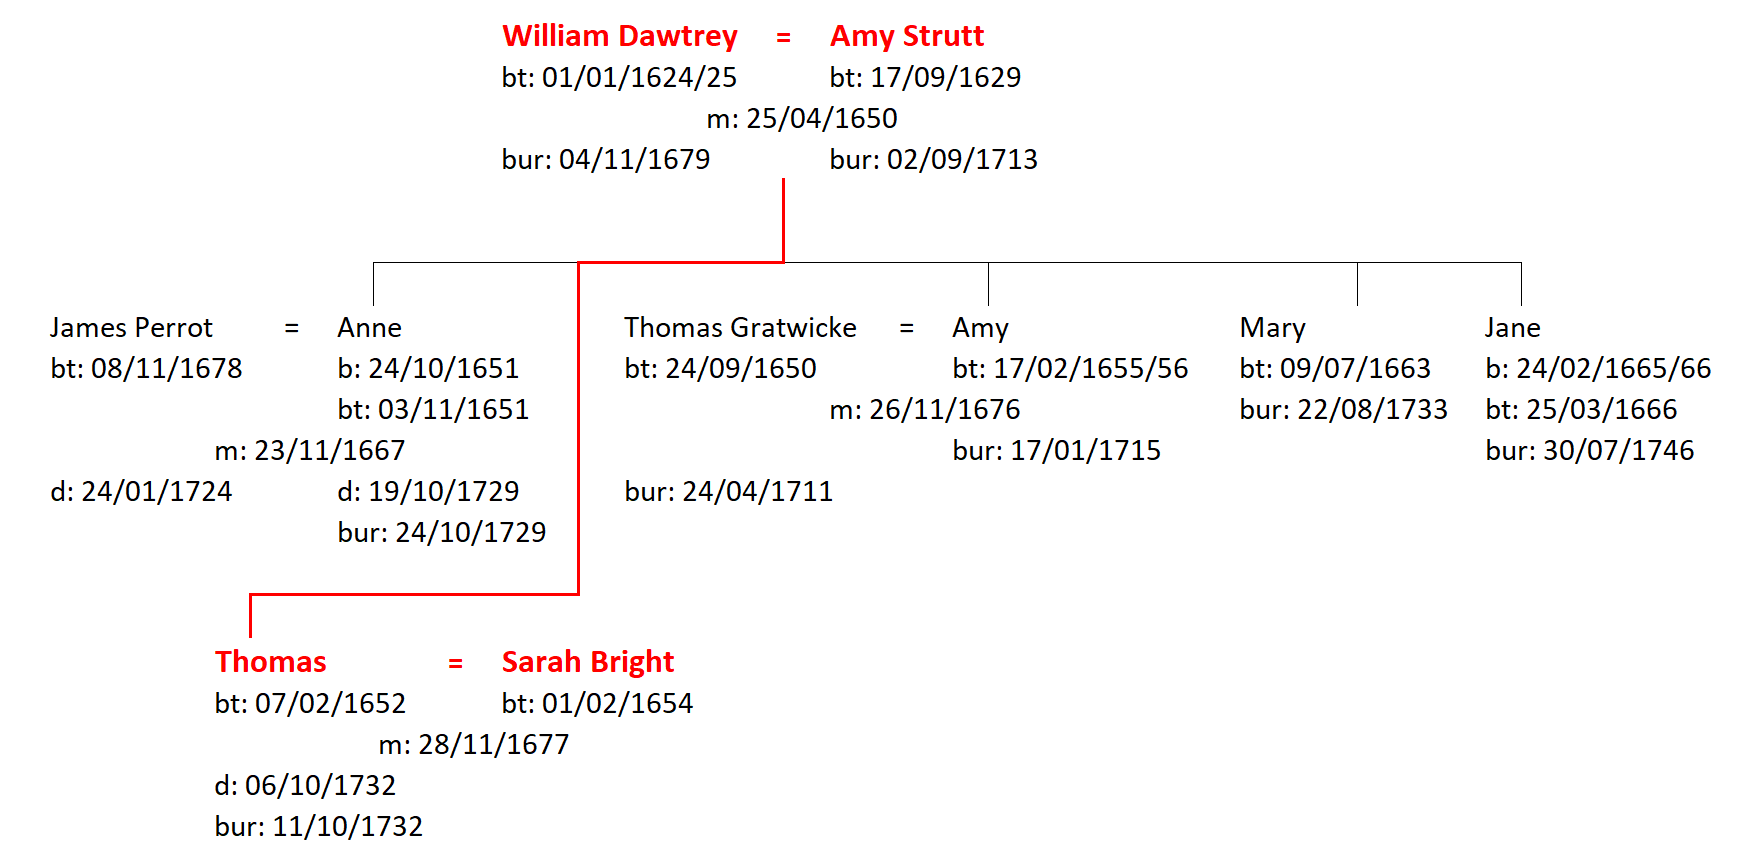 Figure 4: The family of William and Amy Dawtrey